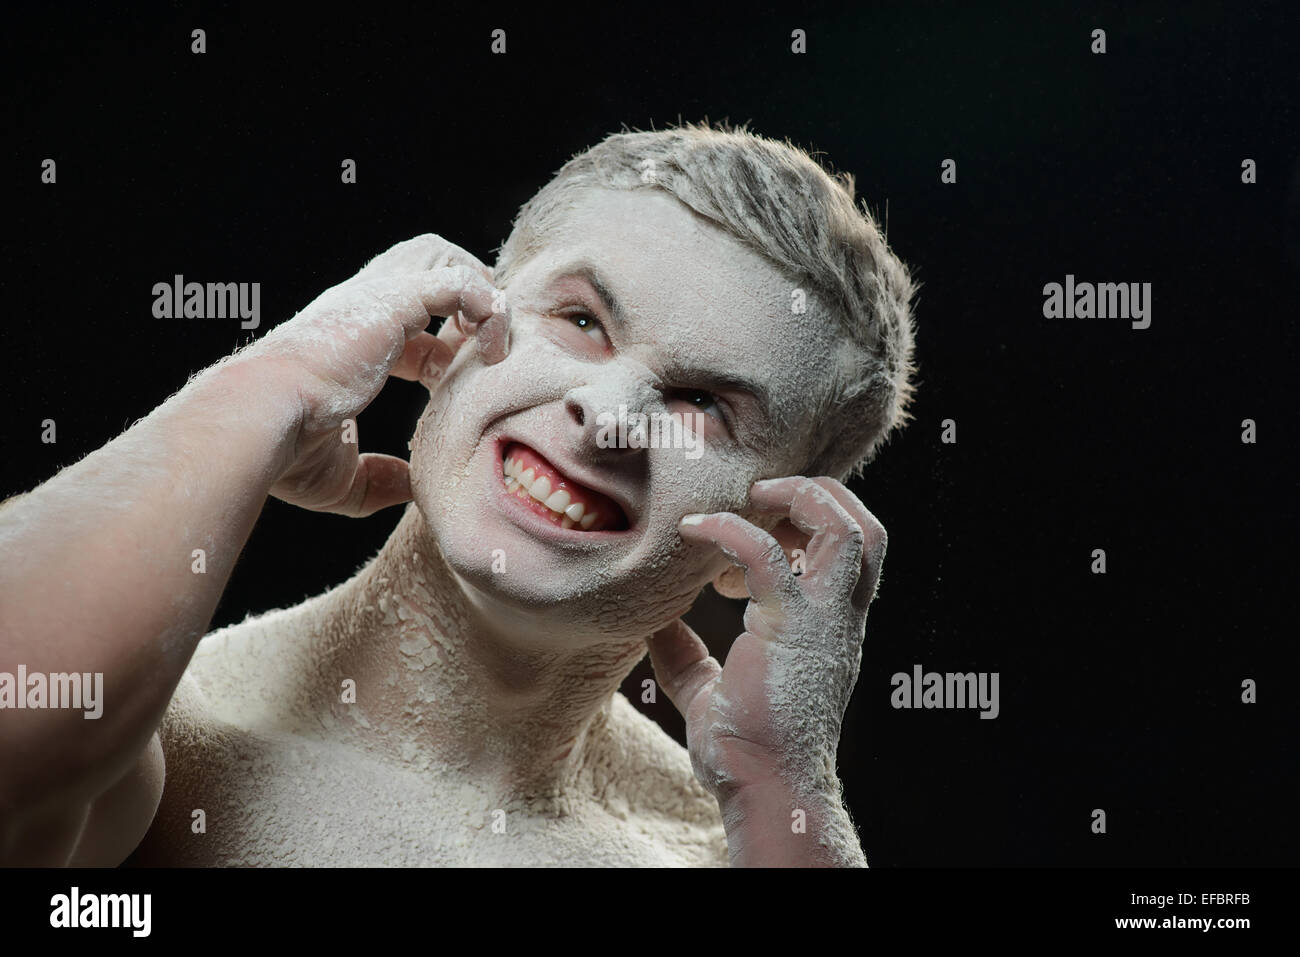 Handsome man covered with powder itching Stock Photo